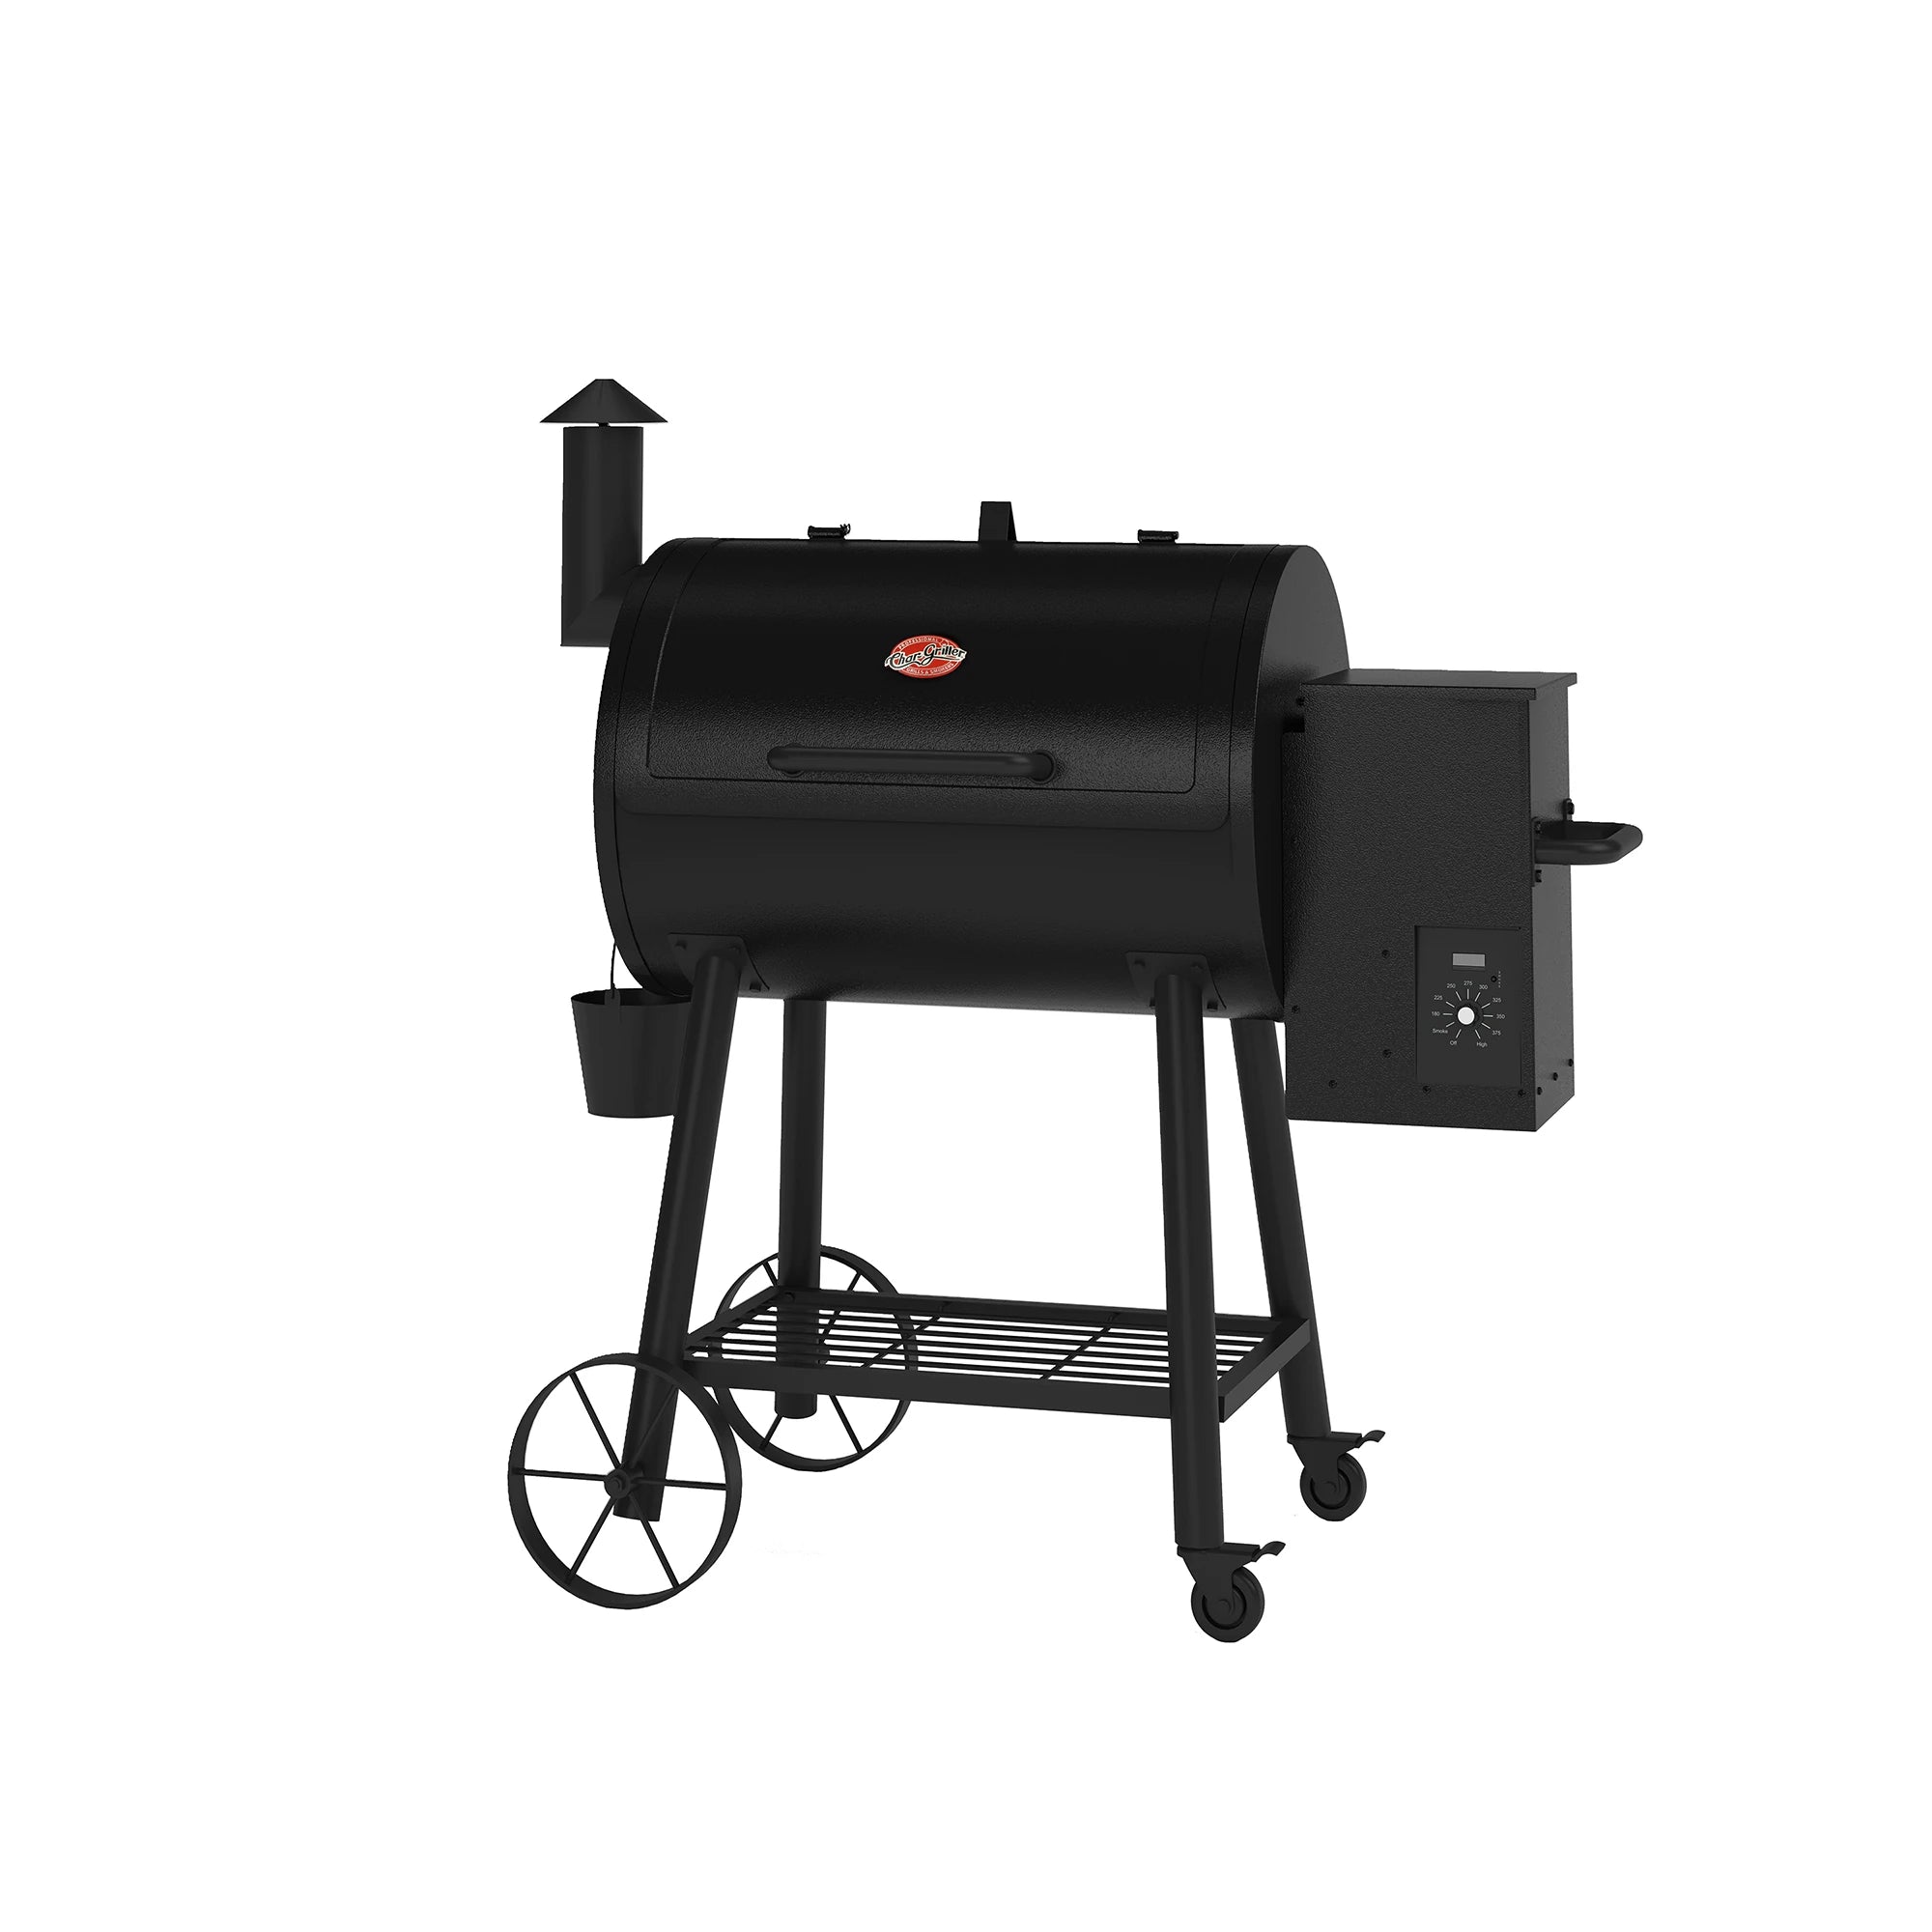 Wood Pro grill tilted slightly to the left to show the round barrel shape and the handle mounted on the hopper box.